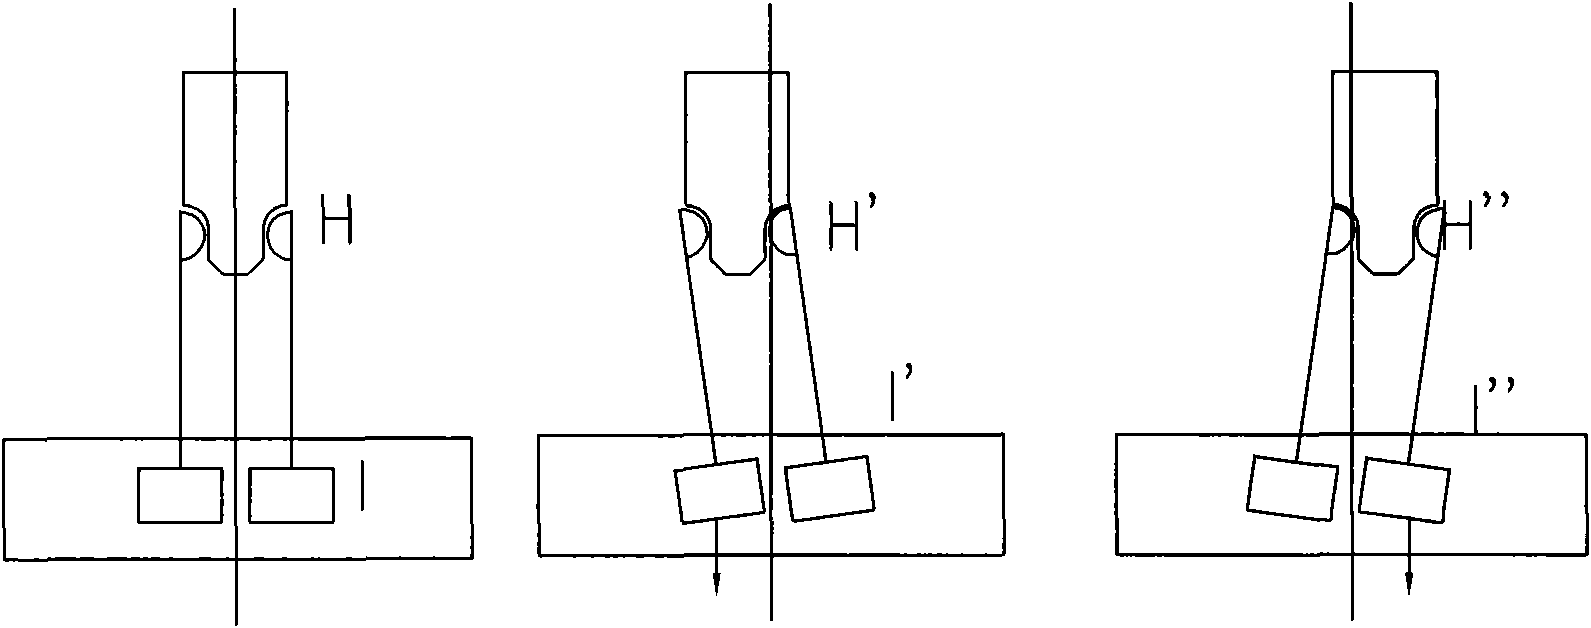 Electric connection mechanism used for plug-in circuit breaker